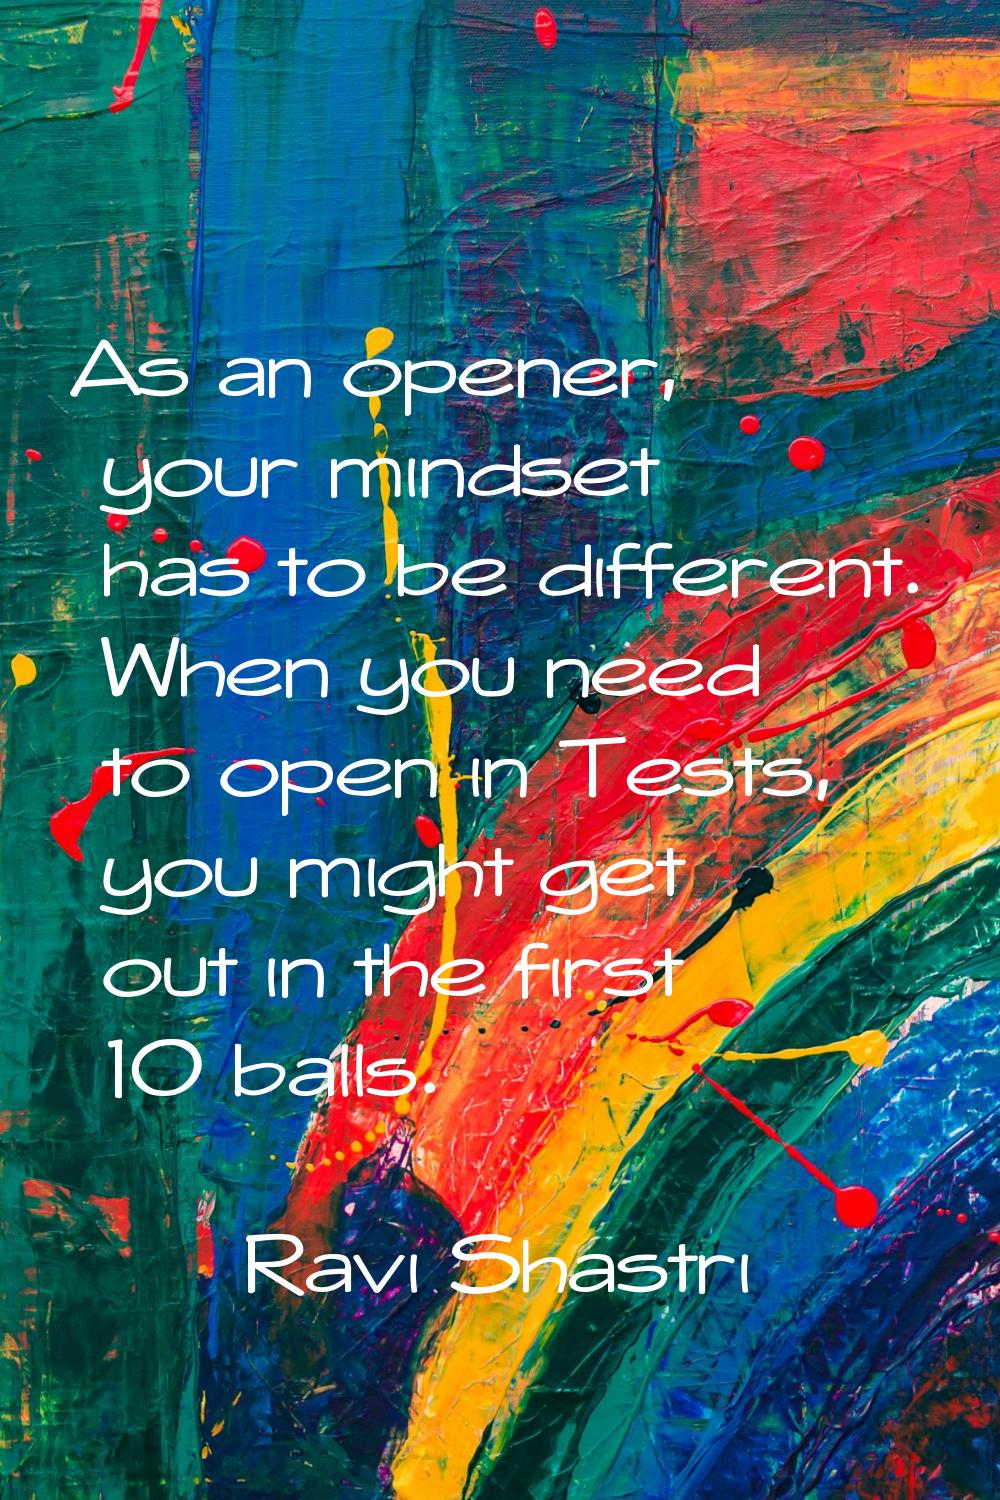 As an opener, your mindset has to be different. When you need to open in Tests, you might get out i